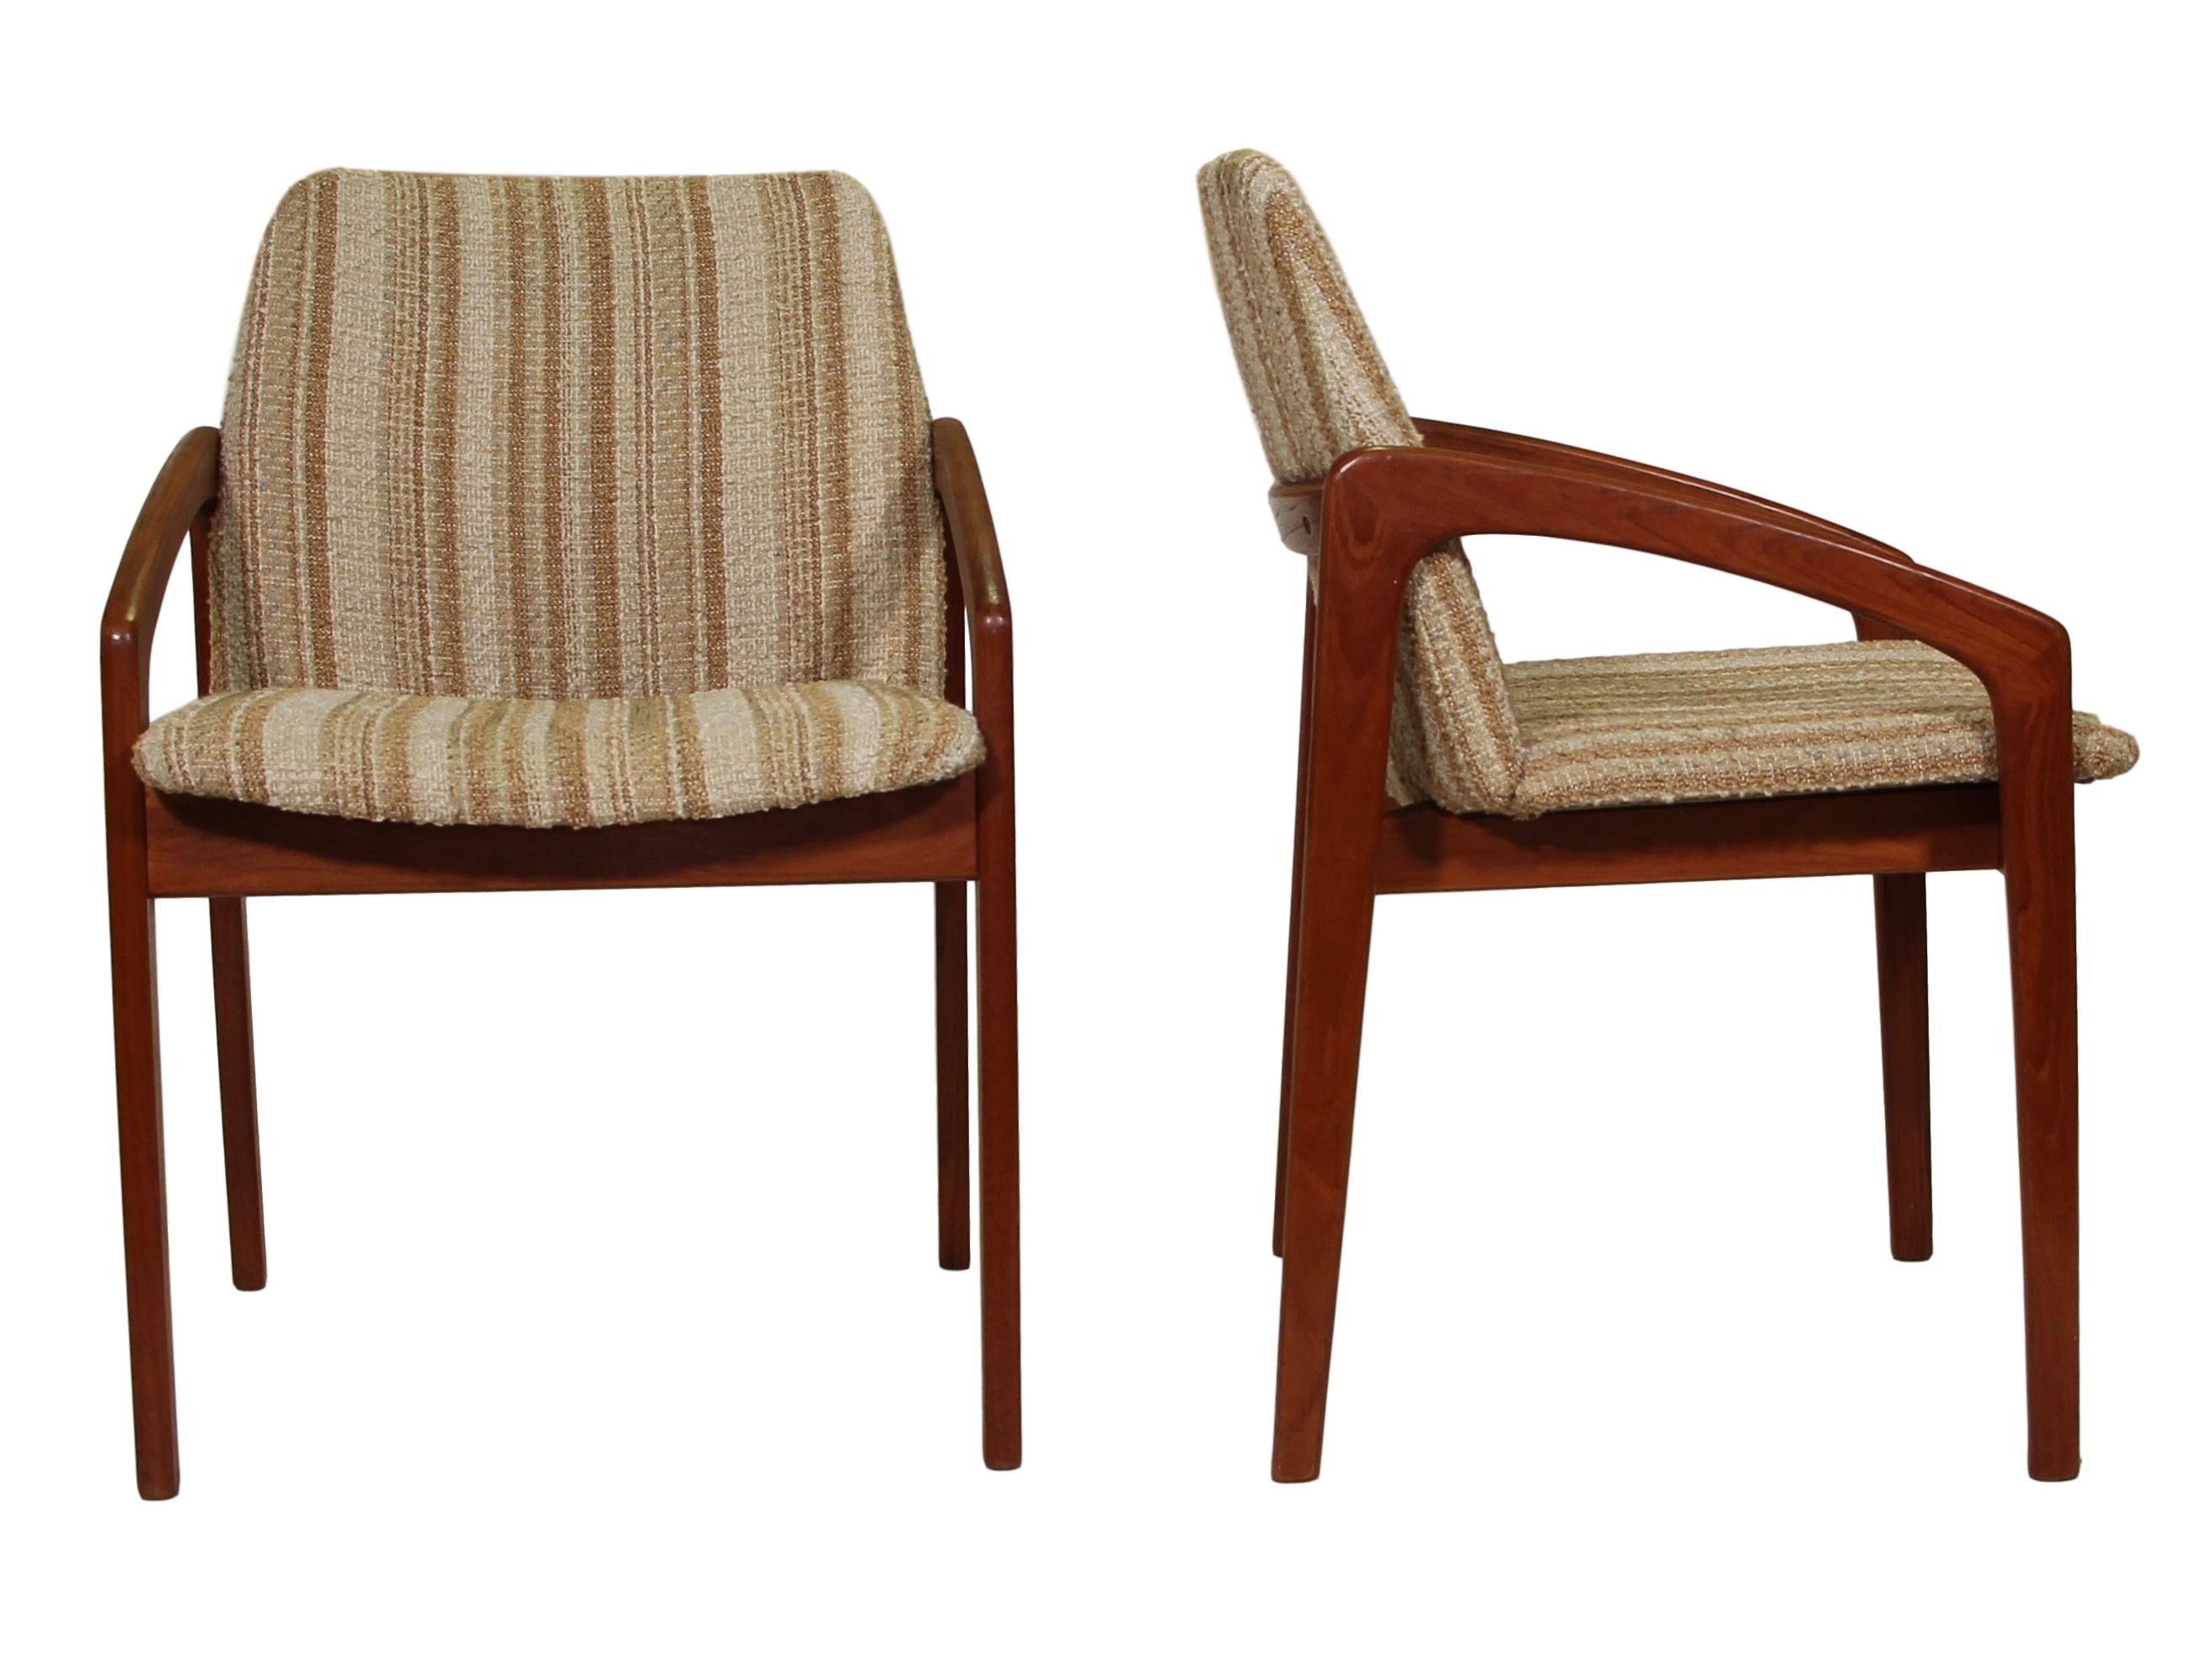 Pair of midcentury teak chairs by Kai Kristiansen. Made in Denmark. They have a unique frame design. The cream and brown striped fabric is original. 

The chairs are in very good vintage condition. One chair has two legs that have a scratch on